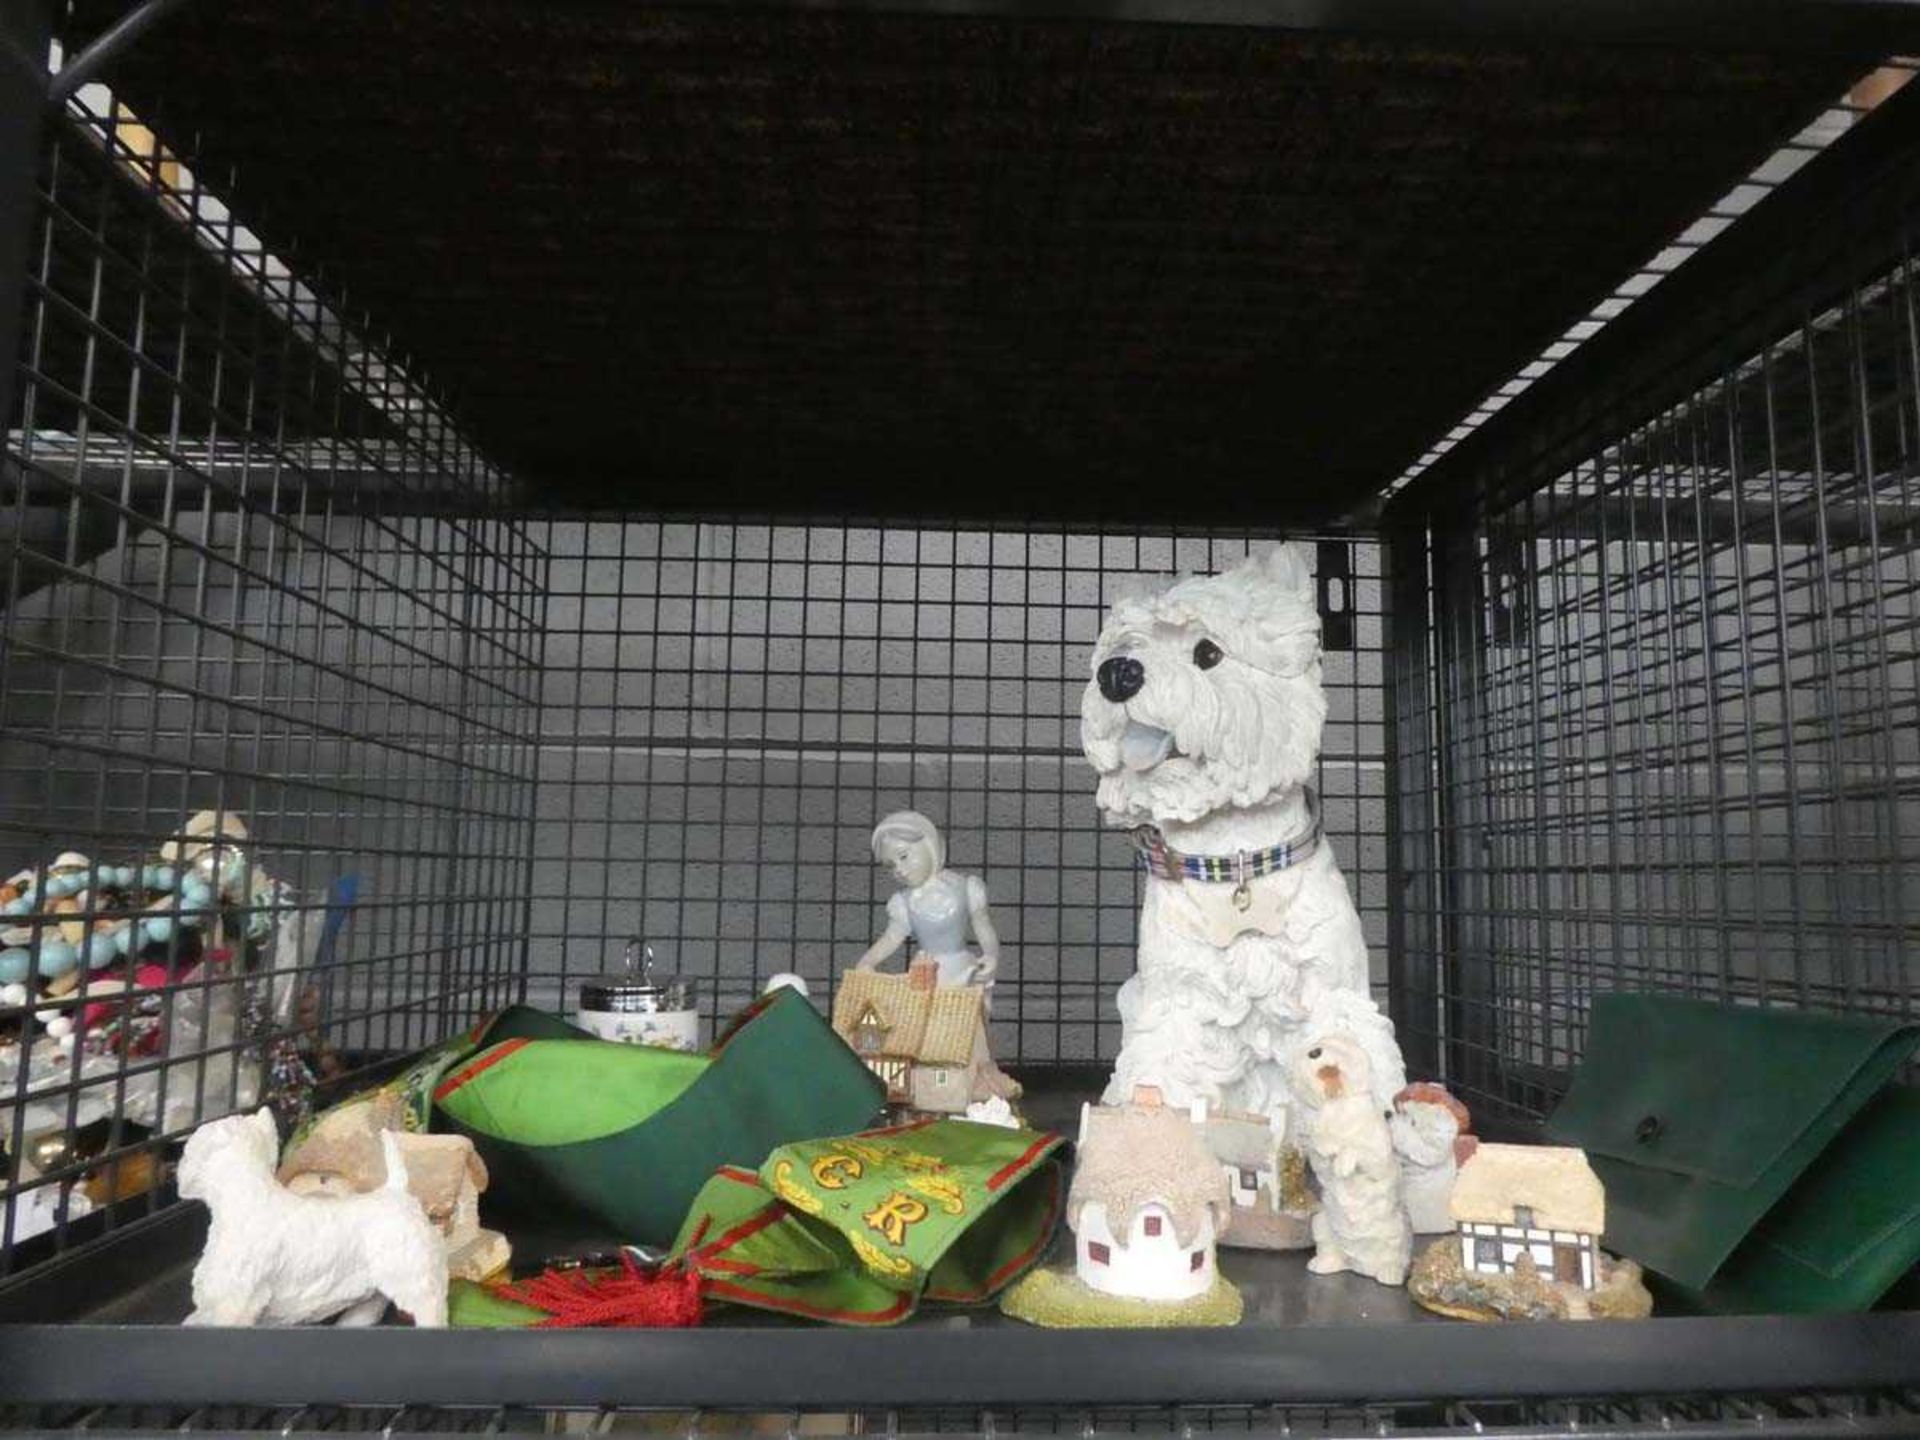 Cage containing omental dog, Nao style figure ornament, cottages, sashes and an egg cobbler